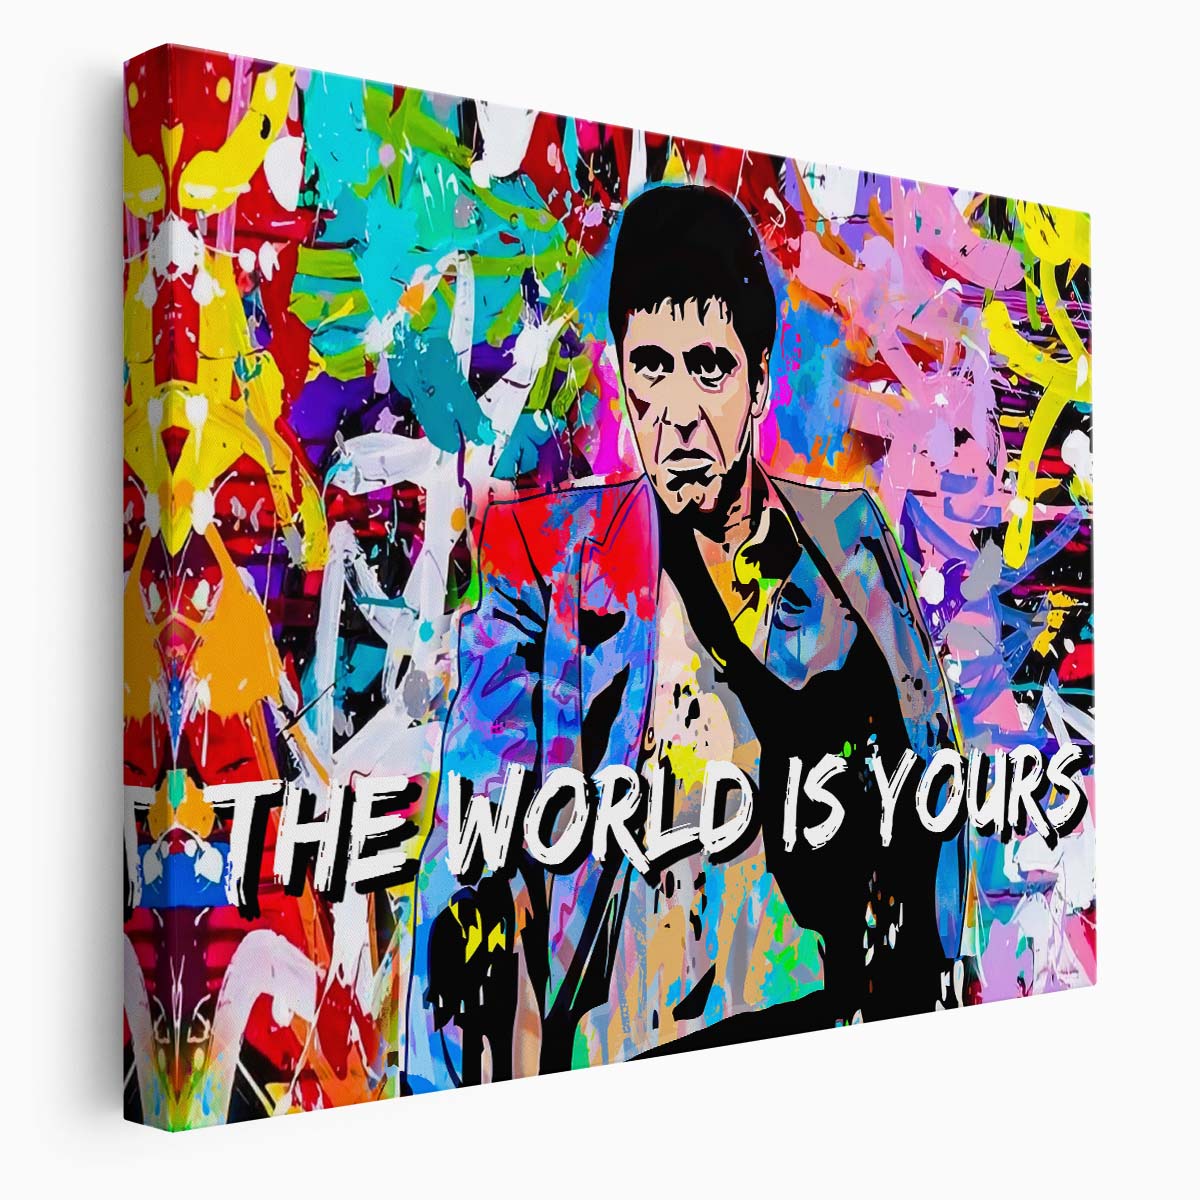 The World Is Yours Graffiti Scarface Wall Art by Luxuriance Designs. Made in USA.